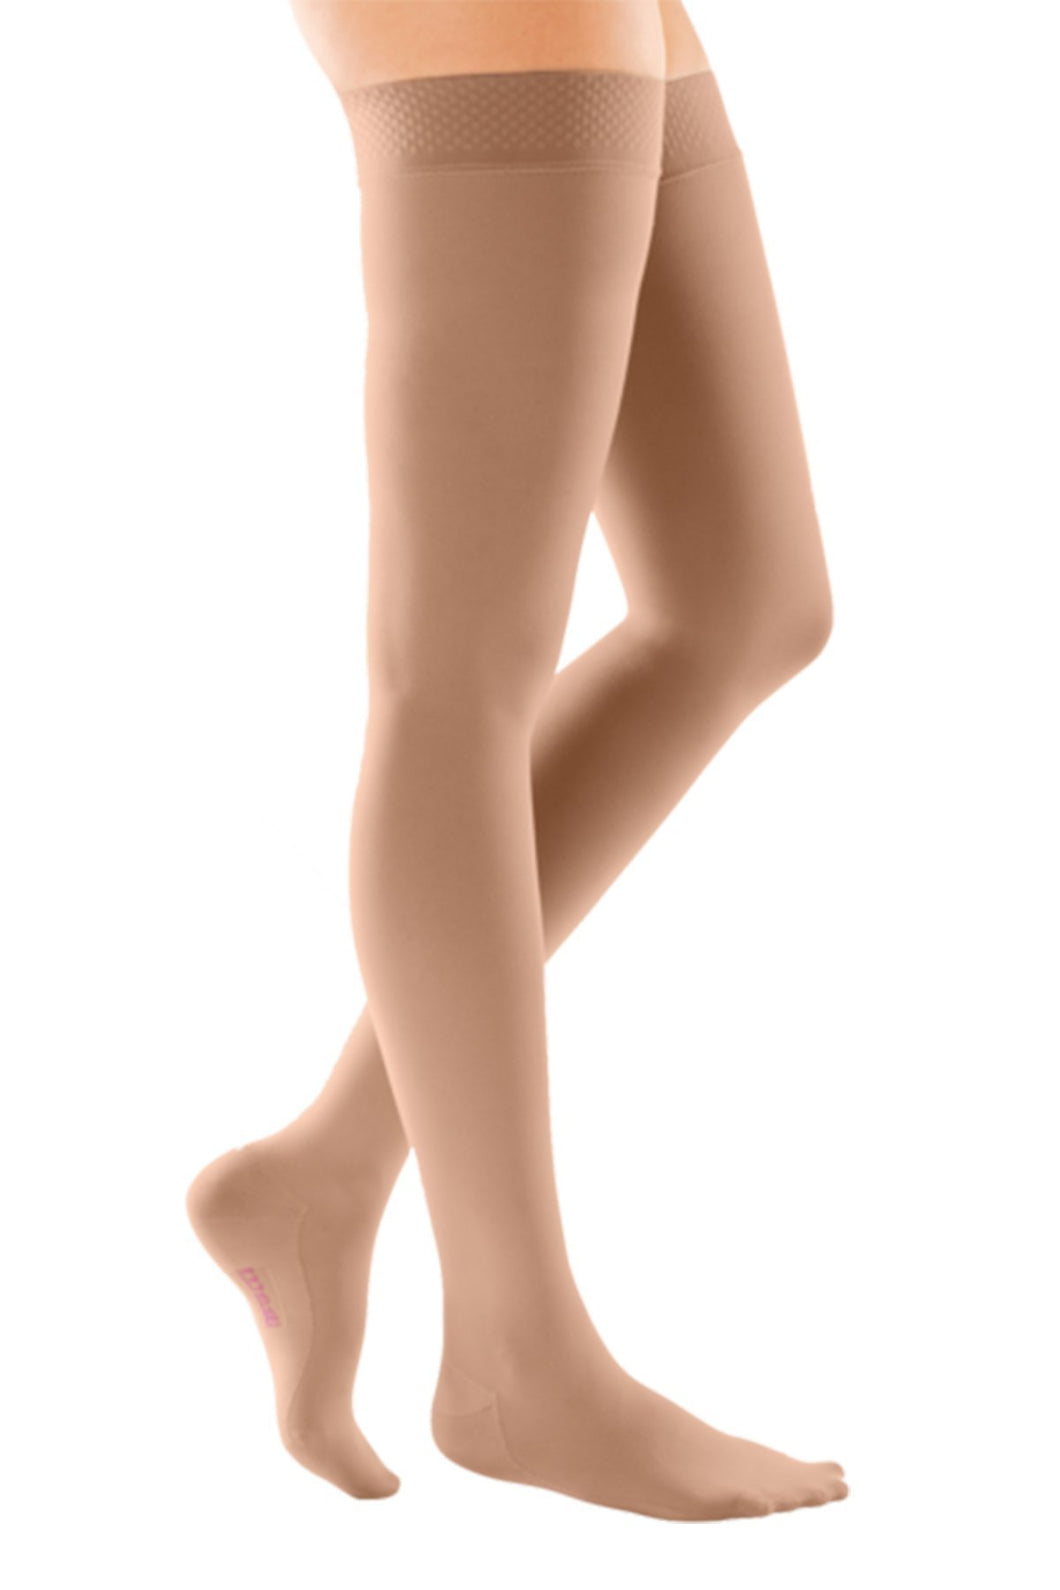 mediven comfort, 30-40 mmHg, Thigh High W/ Silicone Top-Band, Closed Toe